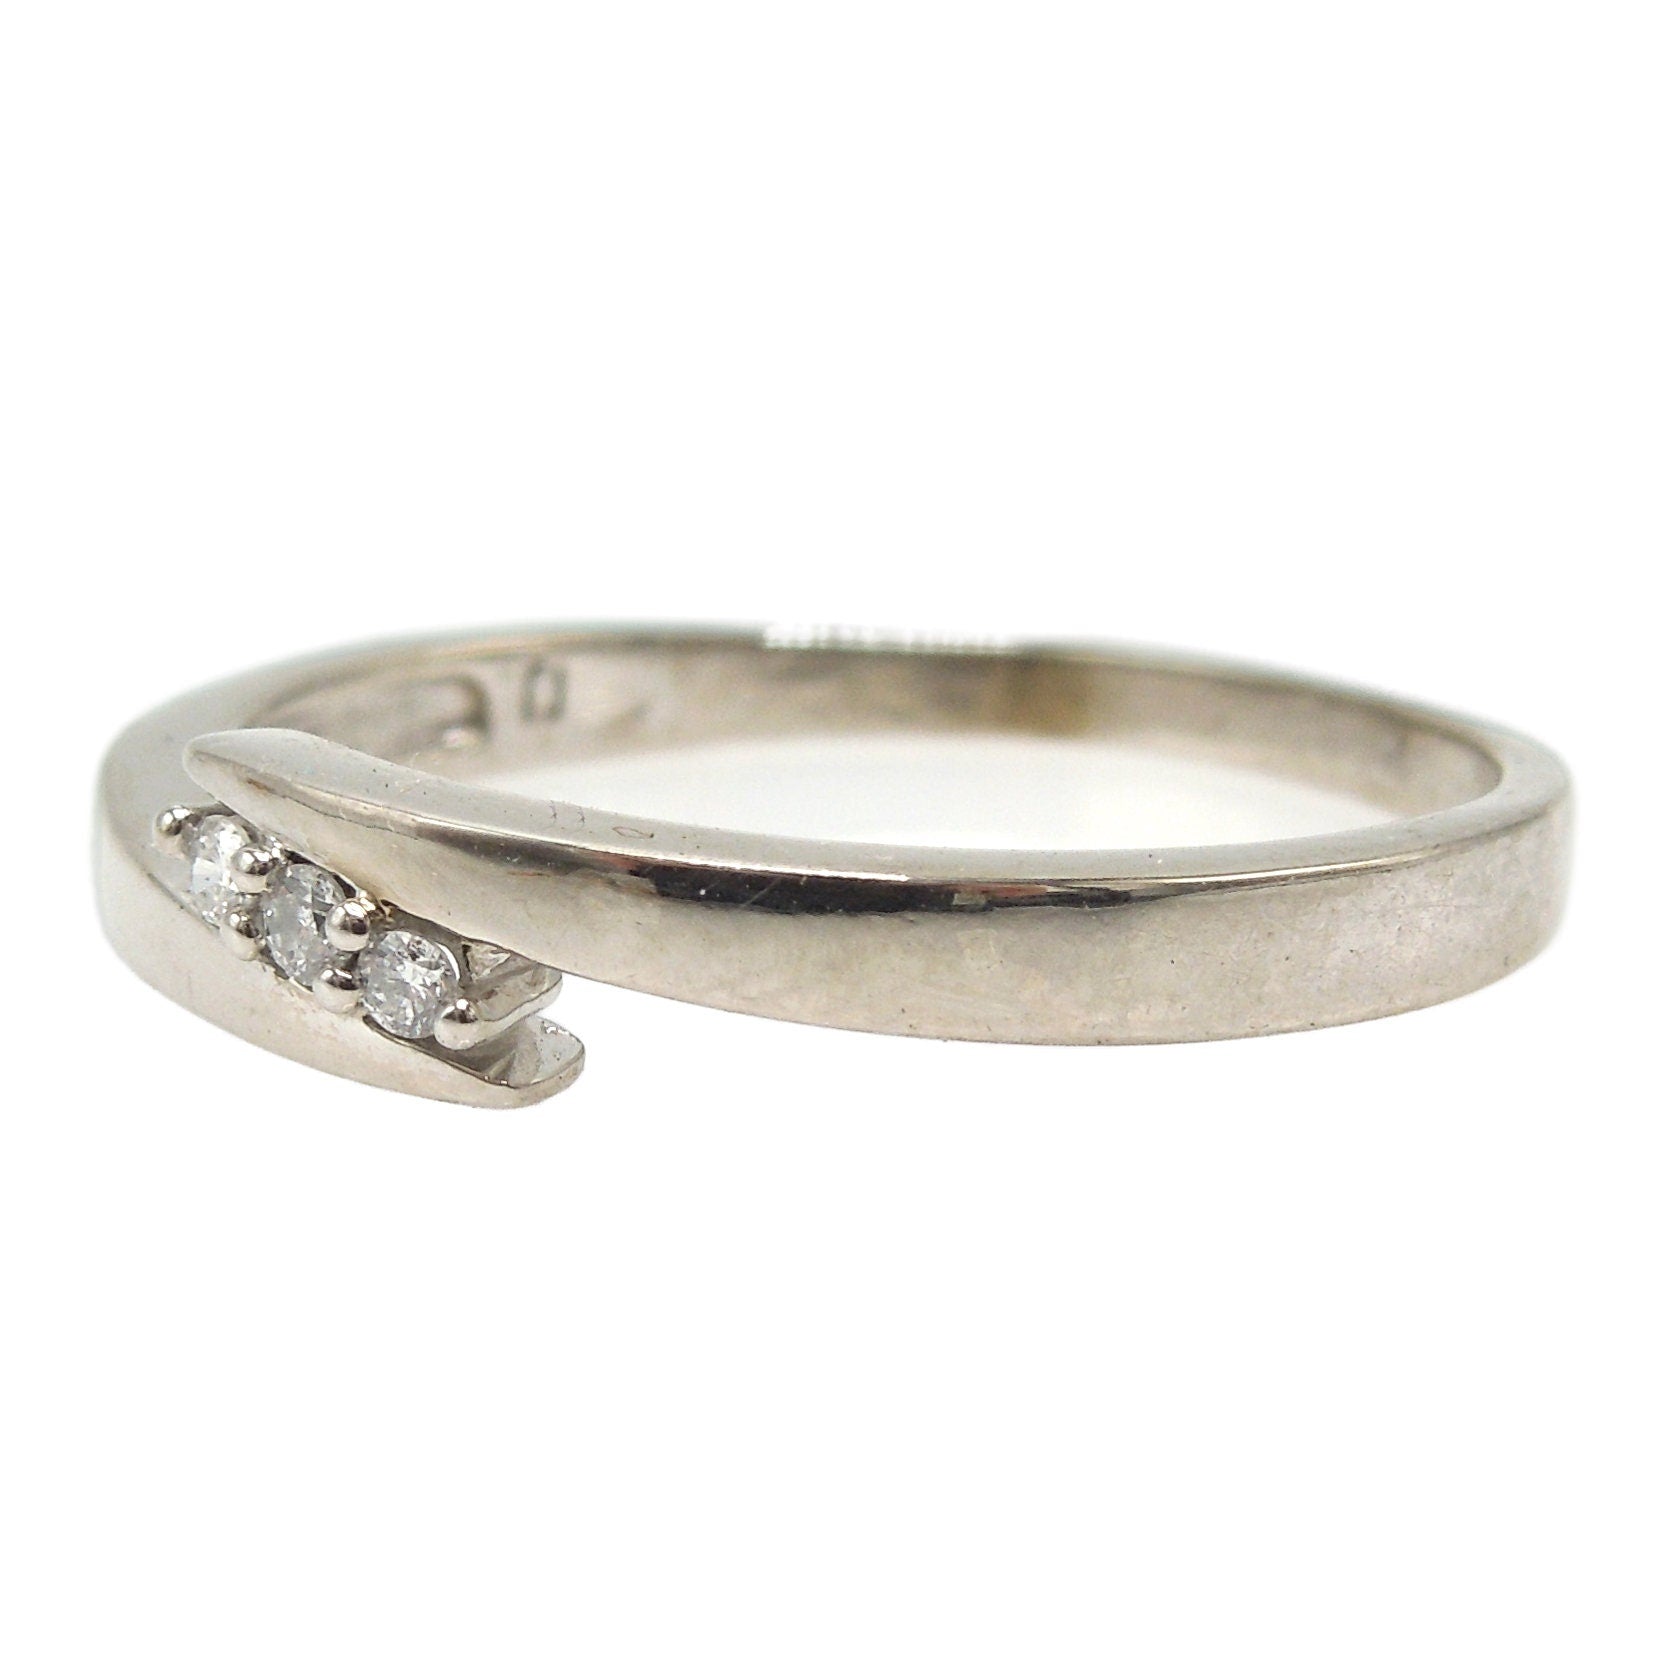 10K White Gold and Diamond Bypass Ring - Size 9.5